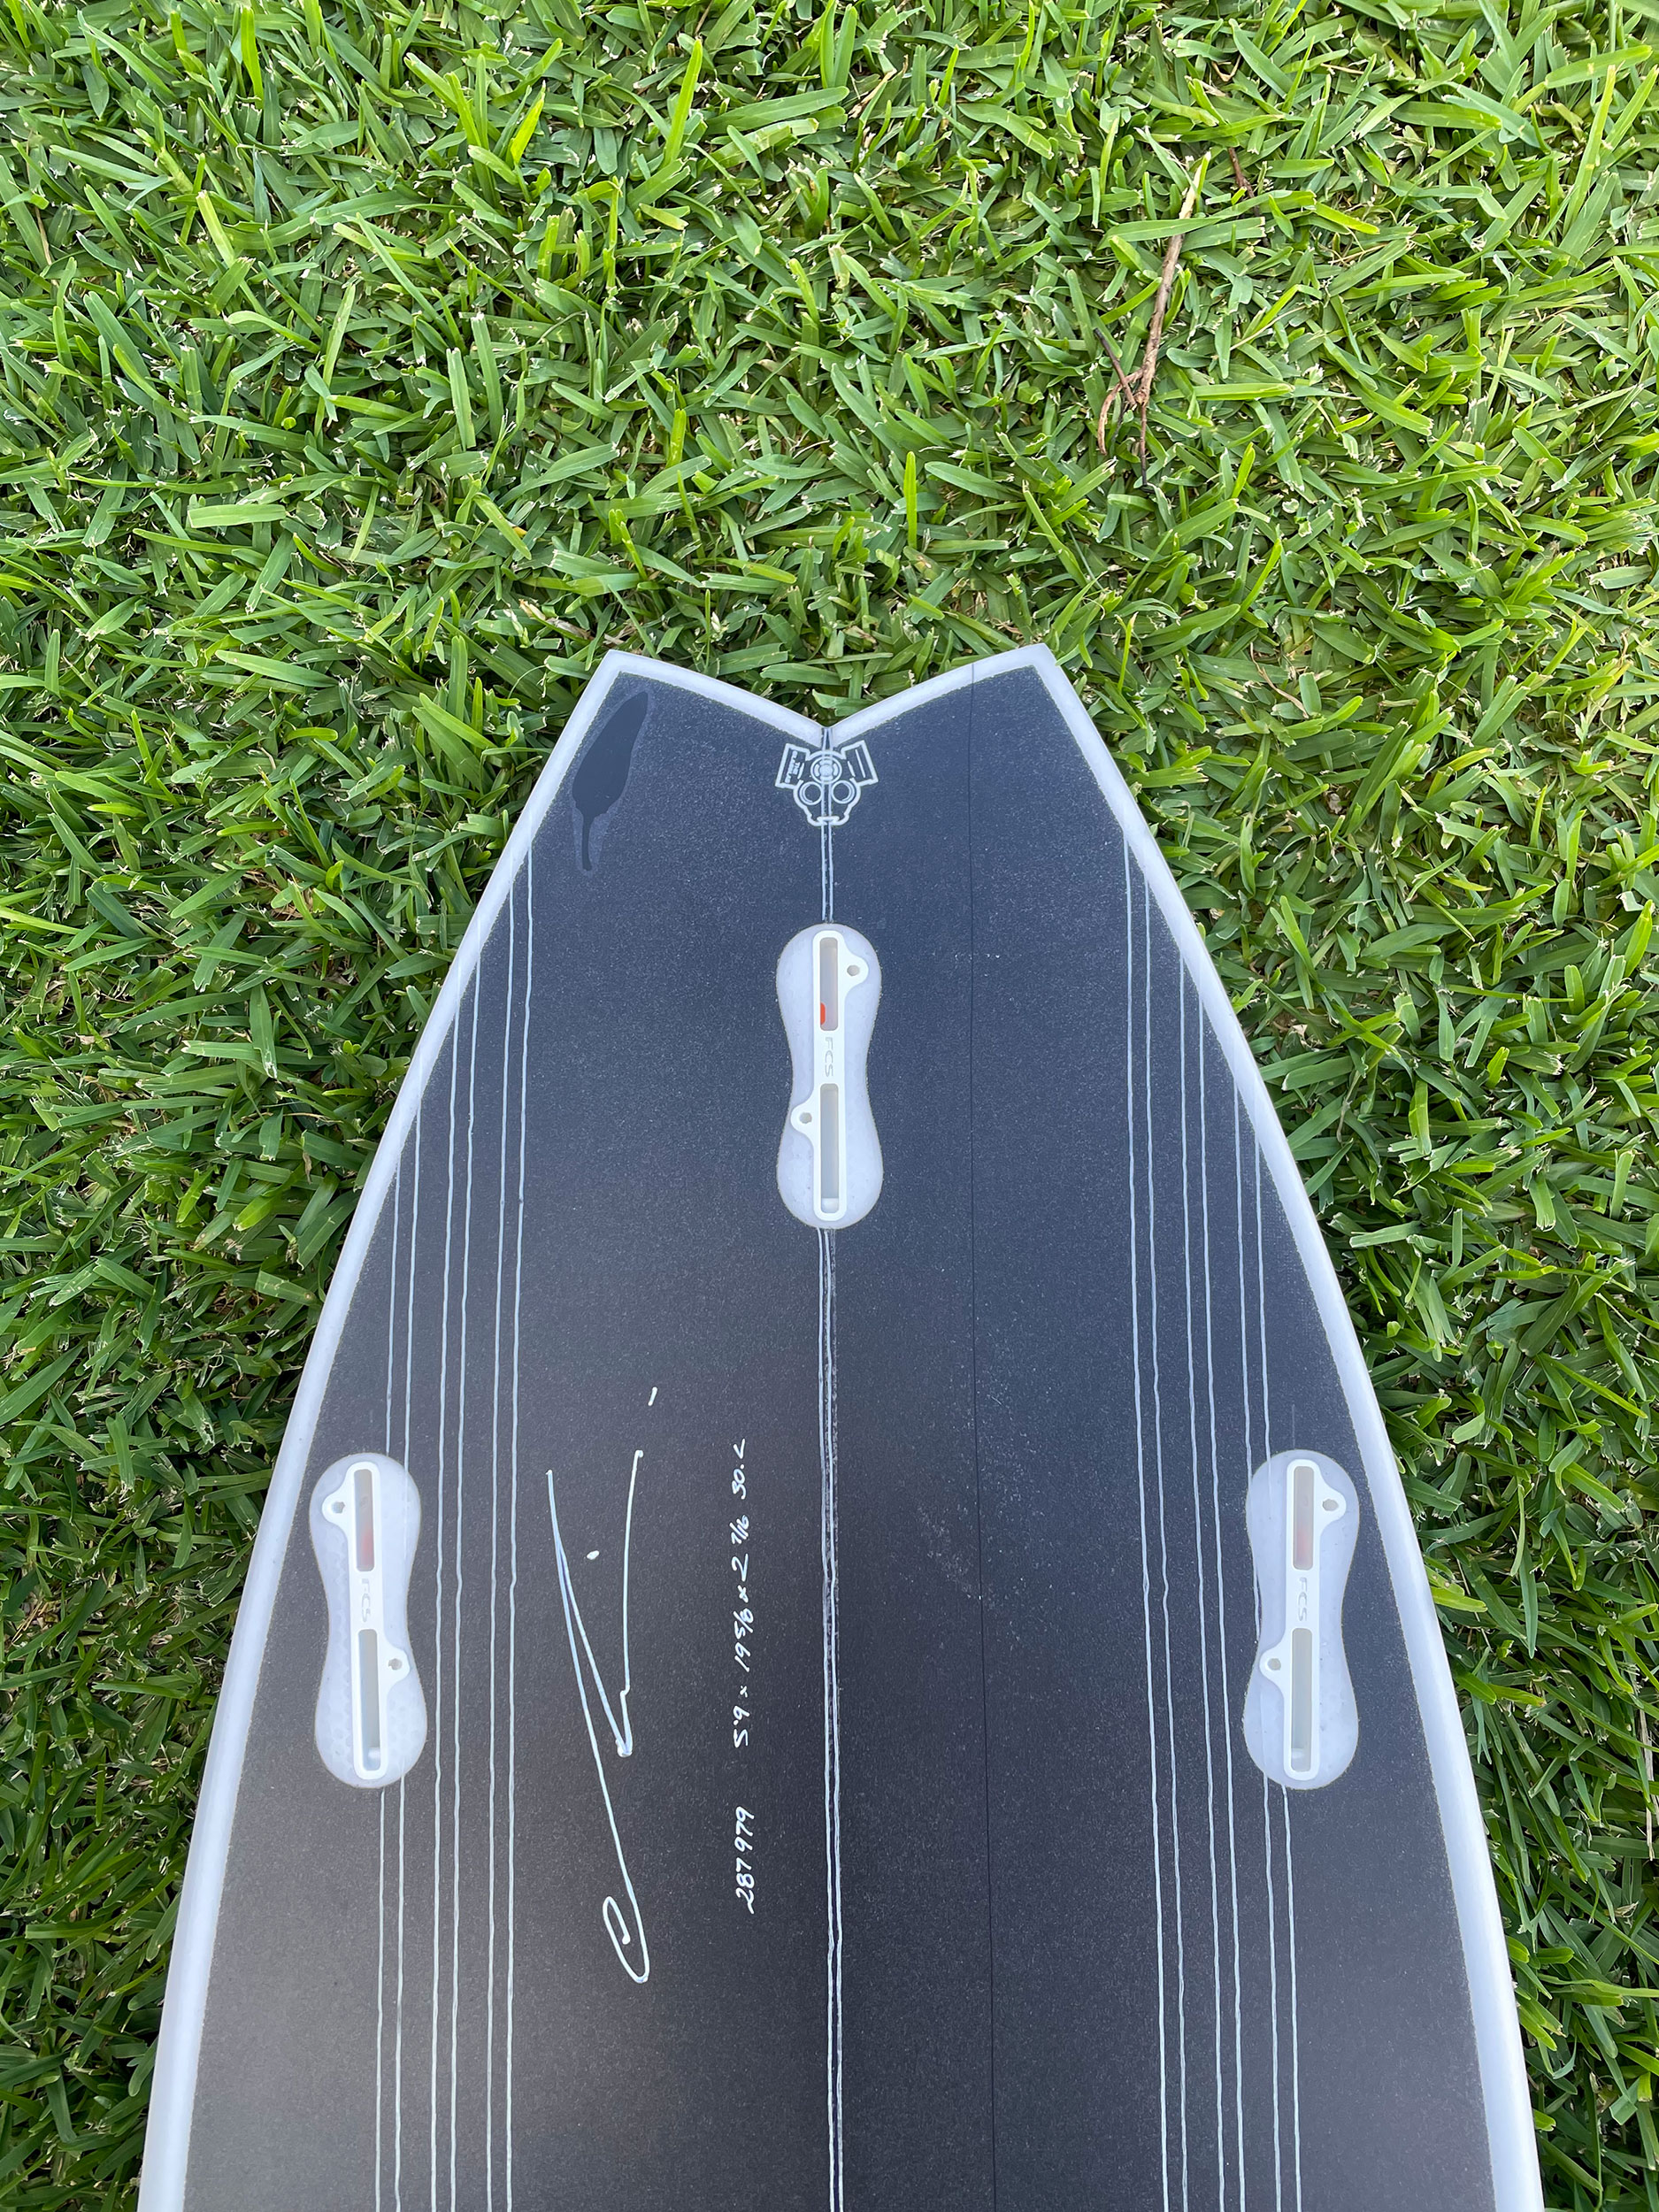 Chilli Surfboards BV2 Review